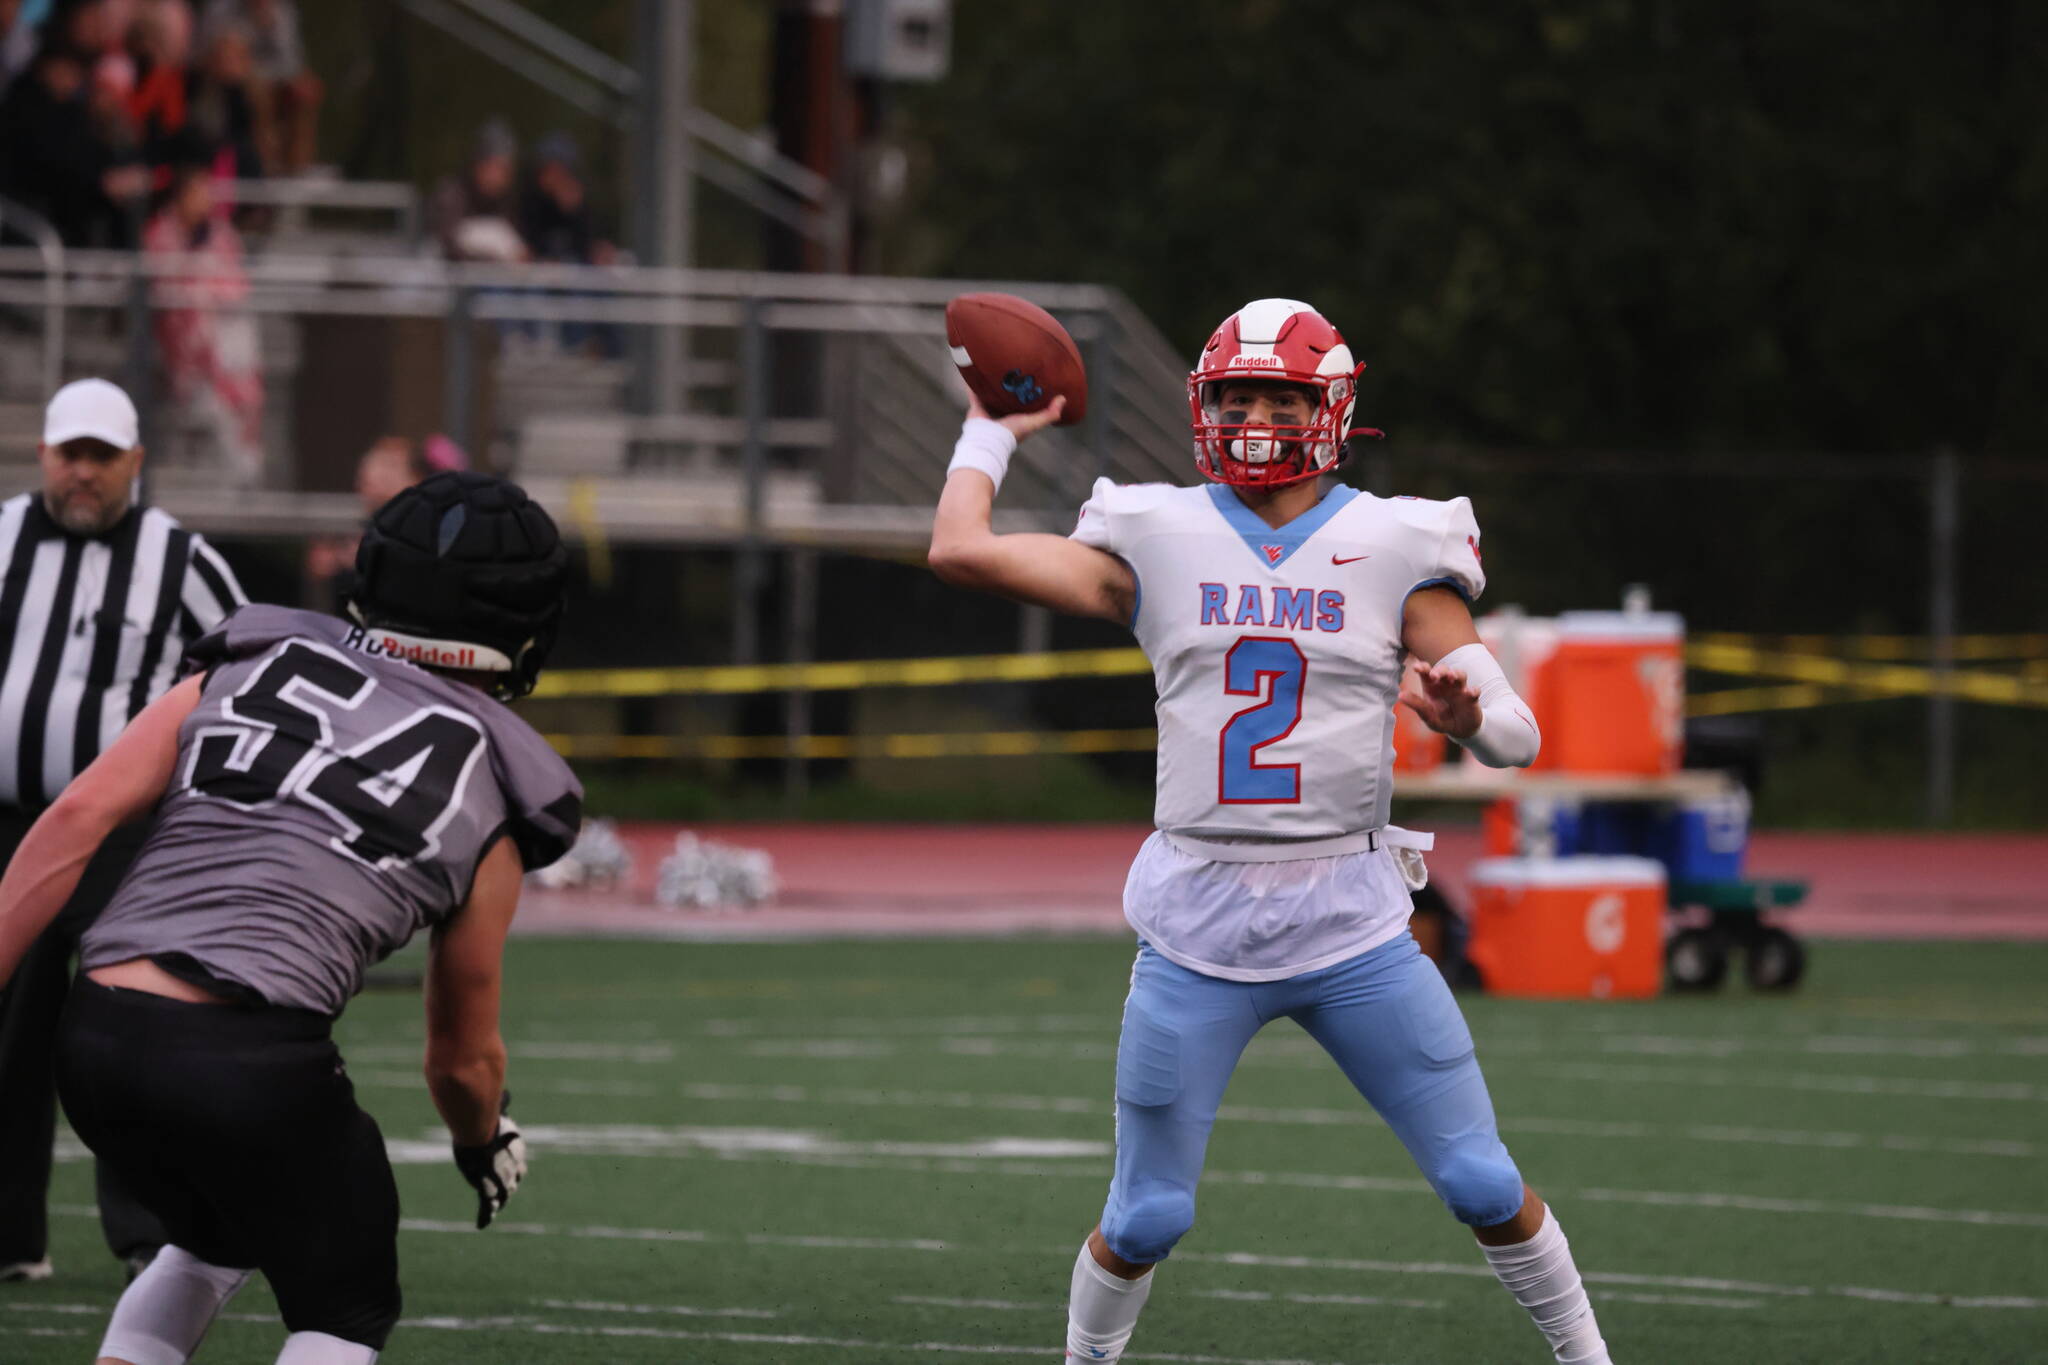 West Valley quarterback Skyler Cassel prepares to throw a pass while under pressure from the Huskies defense. Throughout the game, Cassel proved to be evasive, often extending plays and eluding the Juneau rush. (Ben Hohenstatt / Juneau Empire)